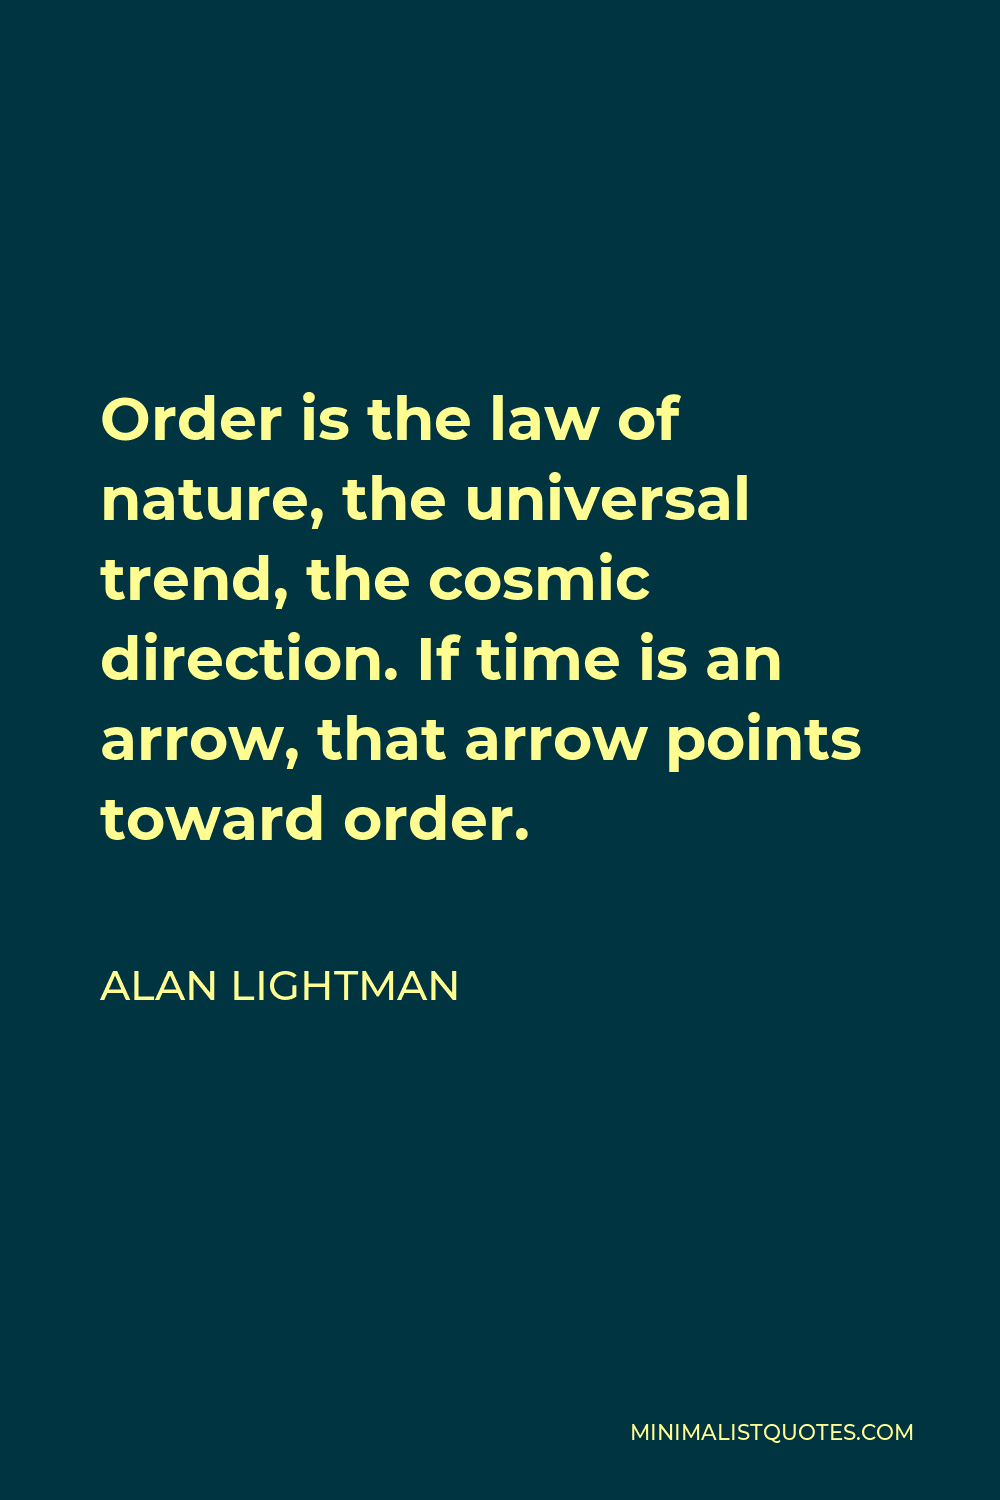 Alan Lightman Quote - Order is the law of nature, the universal trend, the cosmic direction. If time is an arrow, that arrow points toward order.